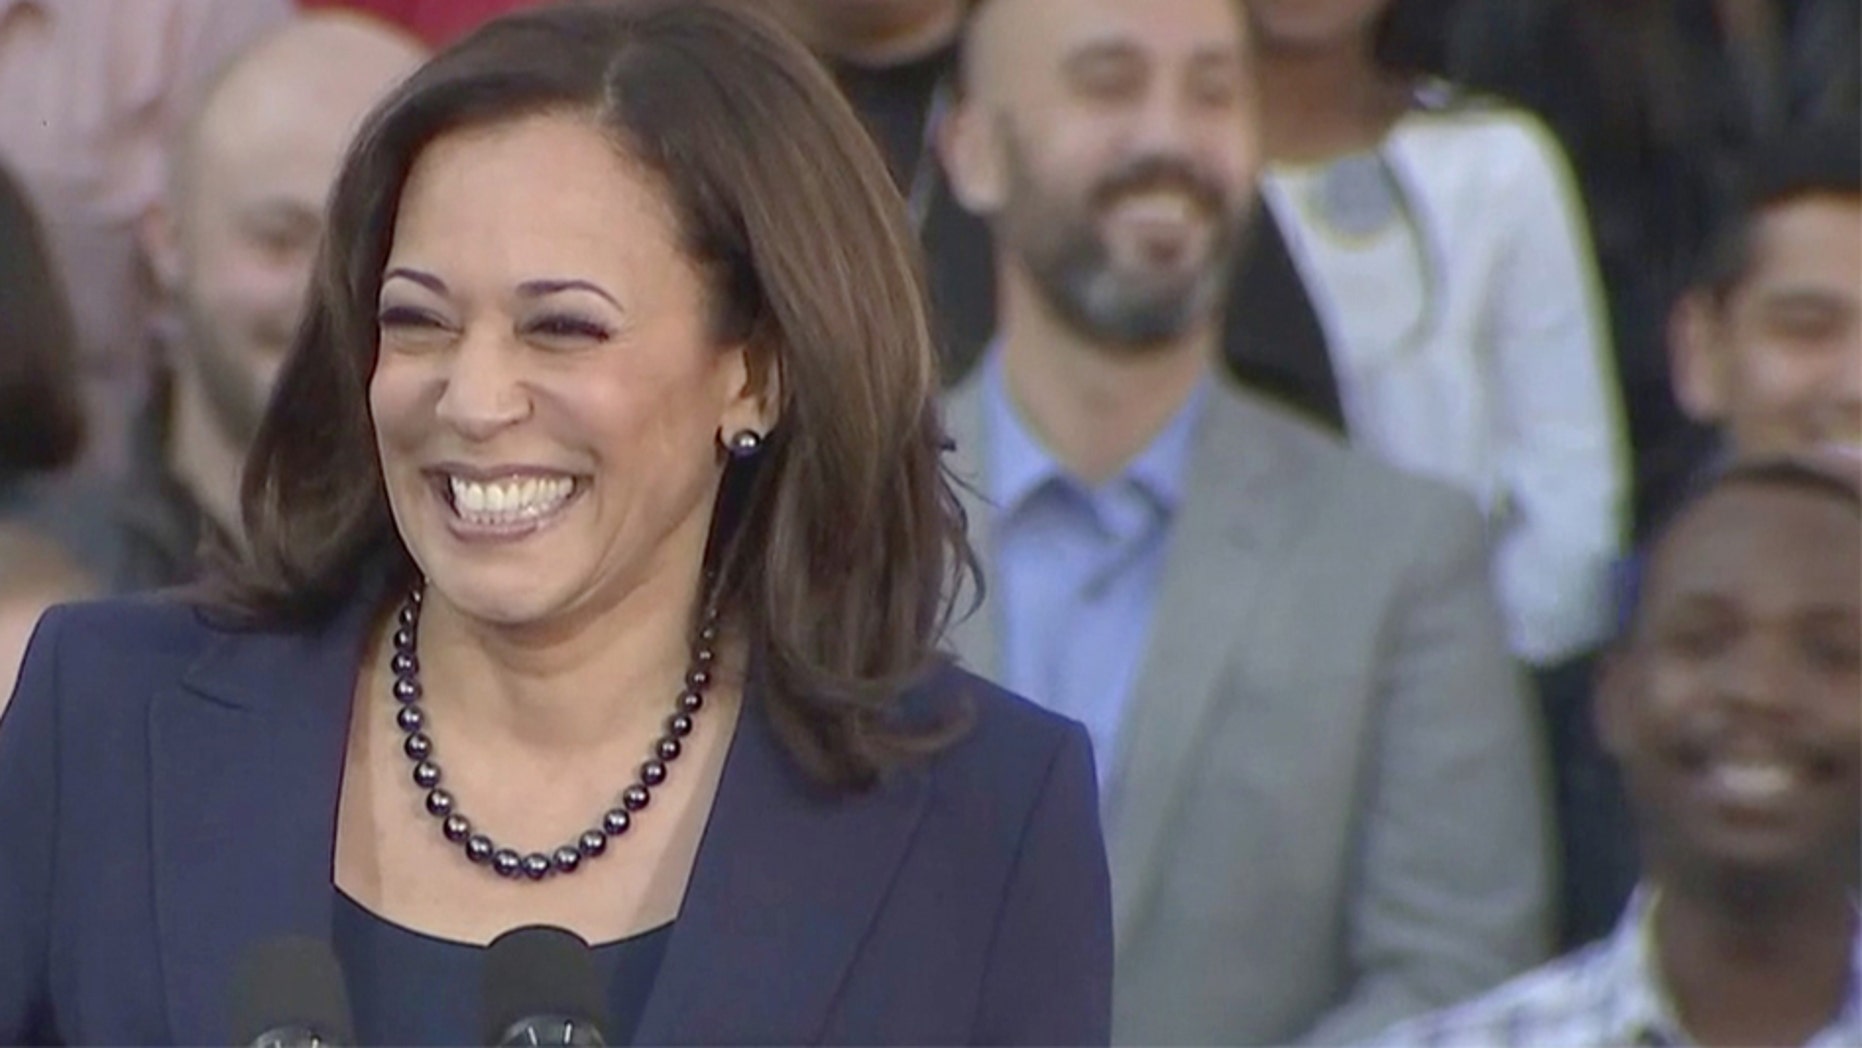 Sen. Kamala Harris, D-Calif., launched her presidential campaign in Oakland on Sunday.